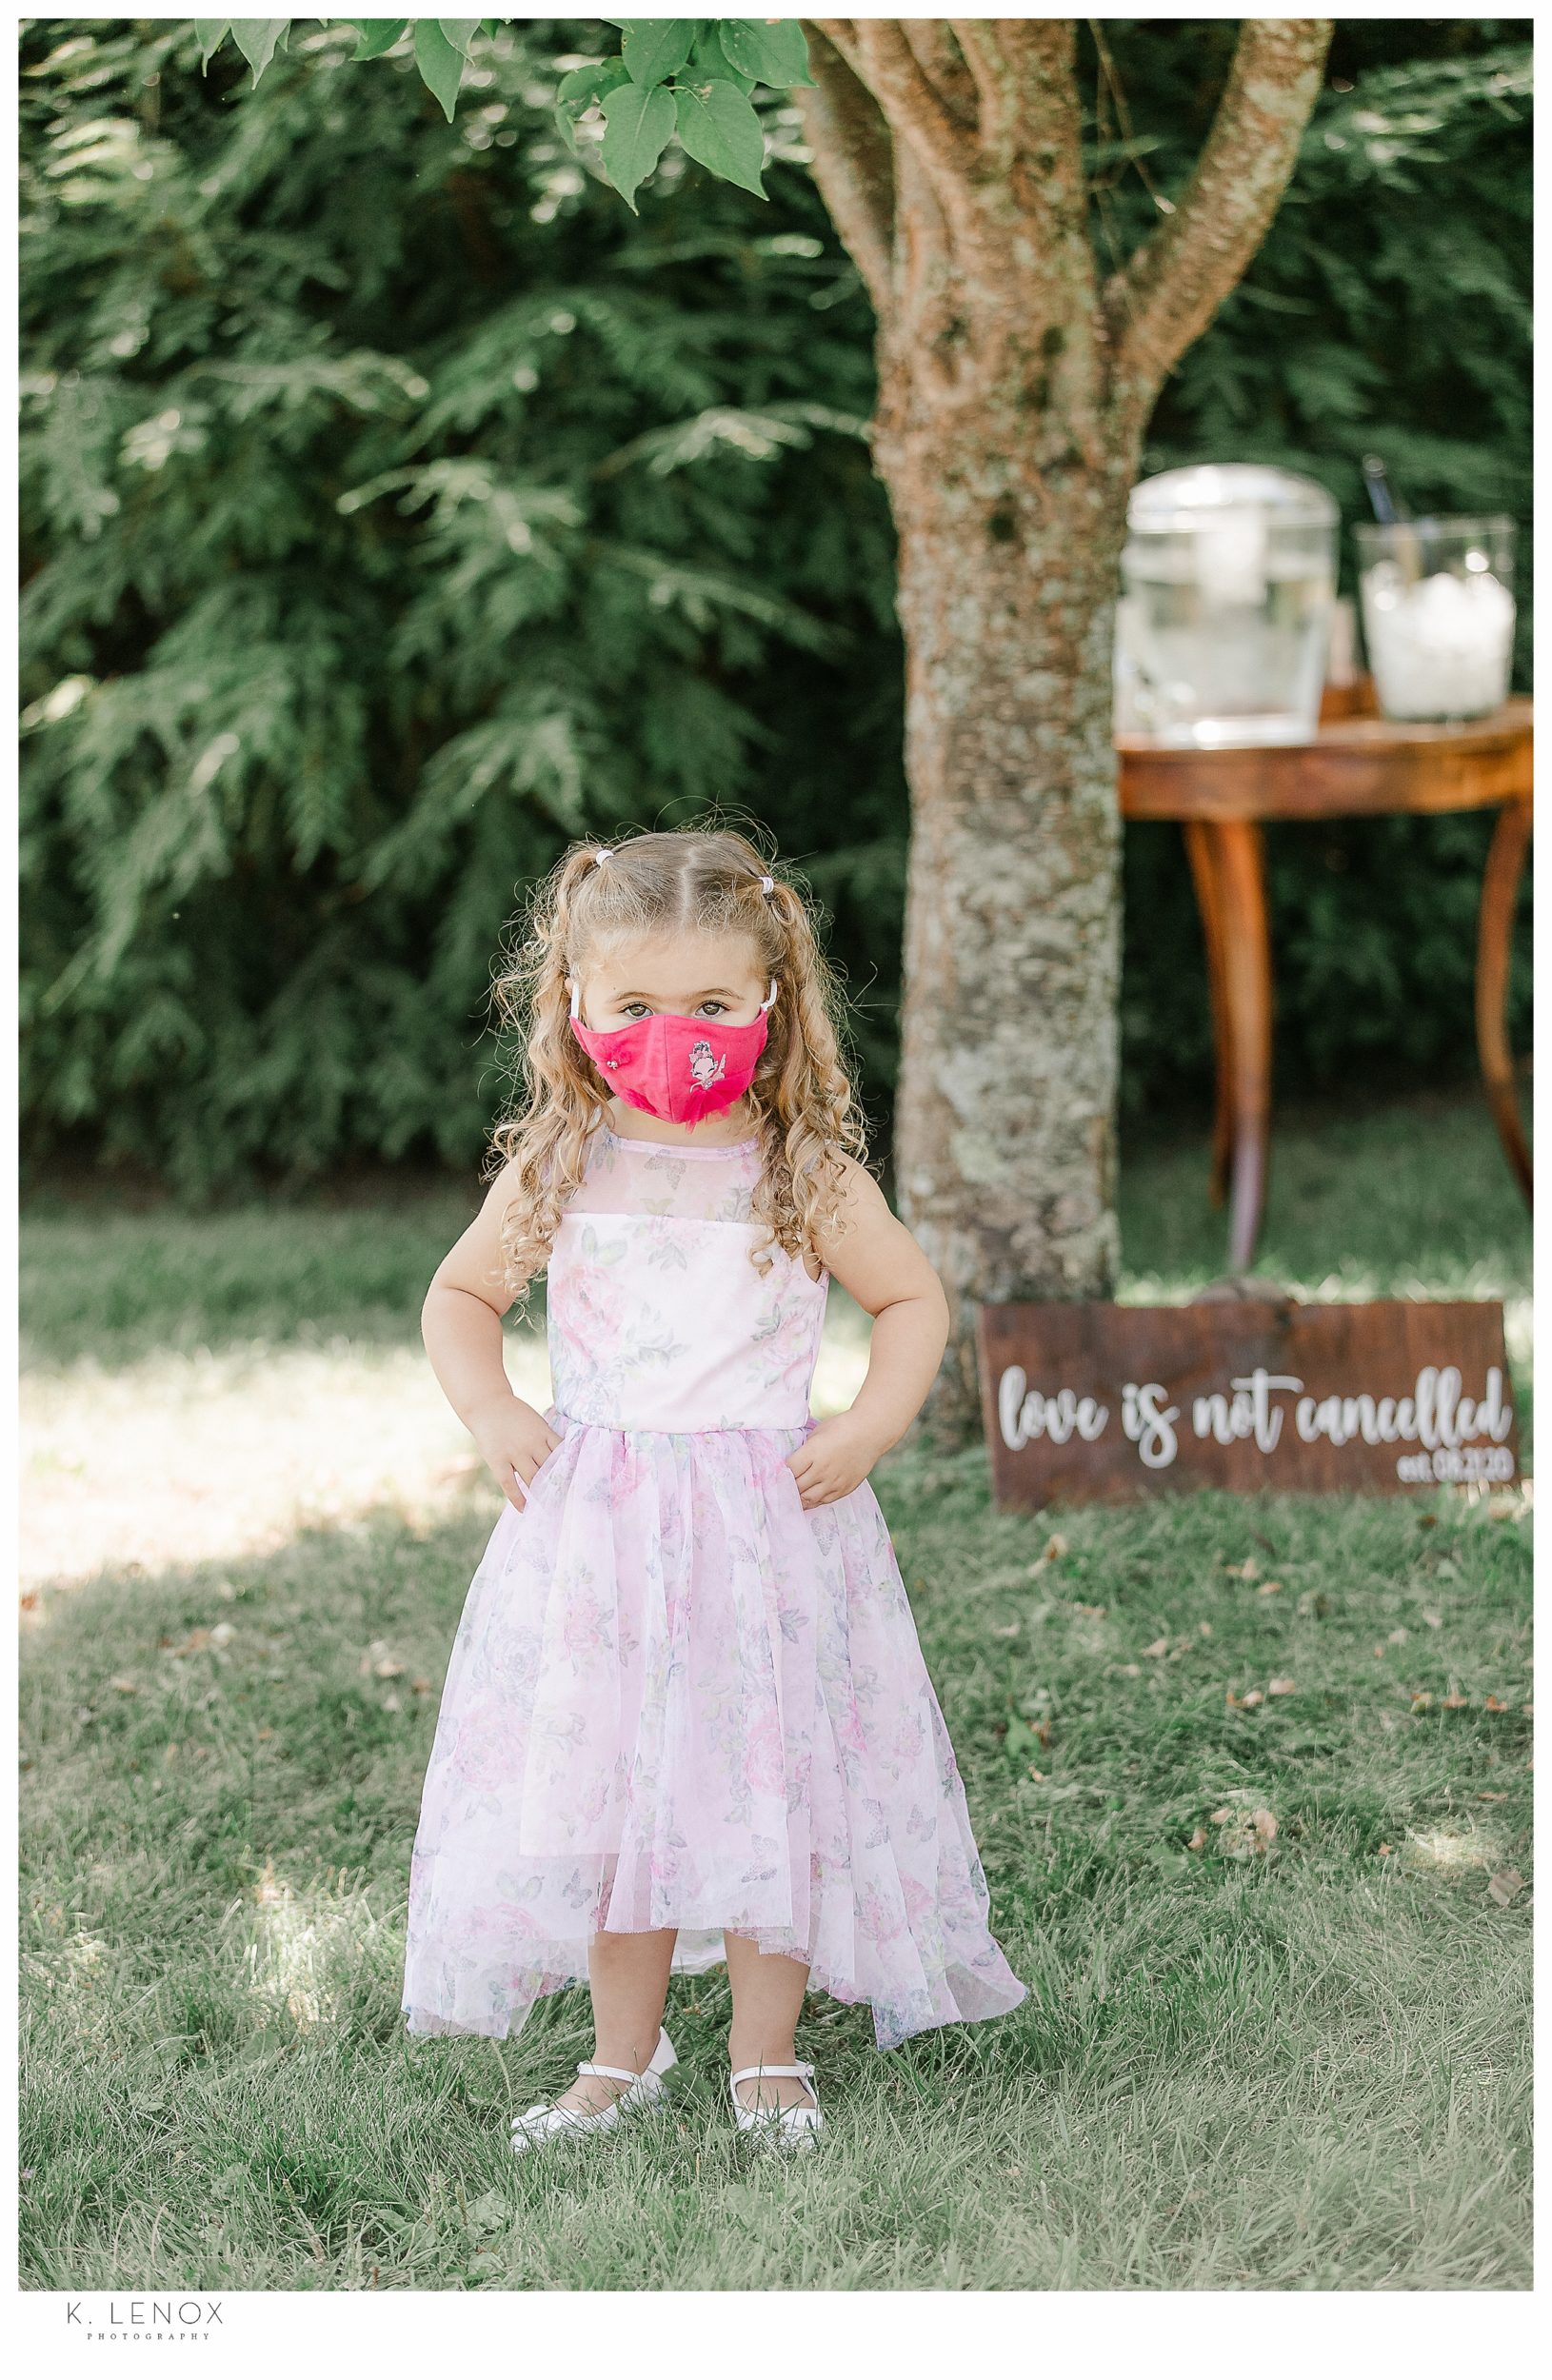 Light and Airy Micro Wedding at Moran Estates- Little girl wearing a pink facemask at a wedding